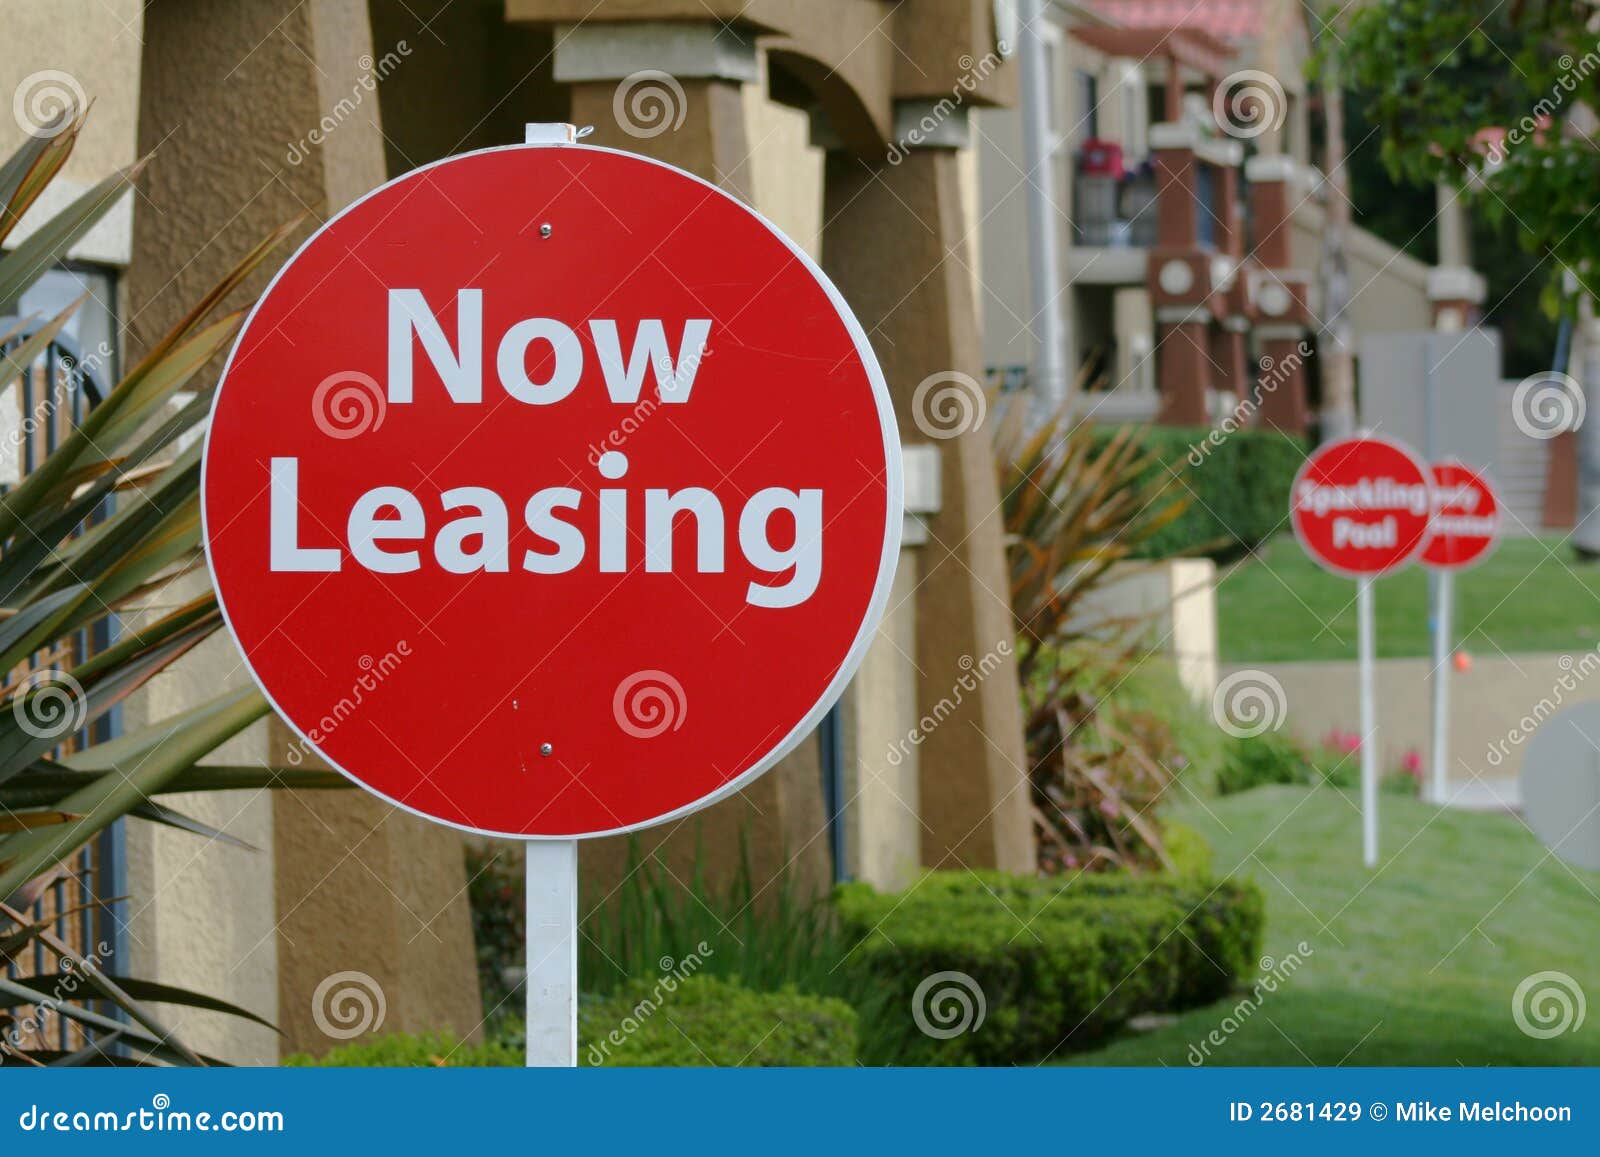 now leasing sign